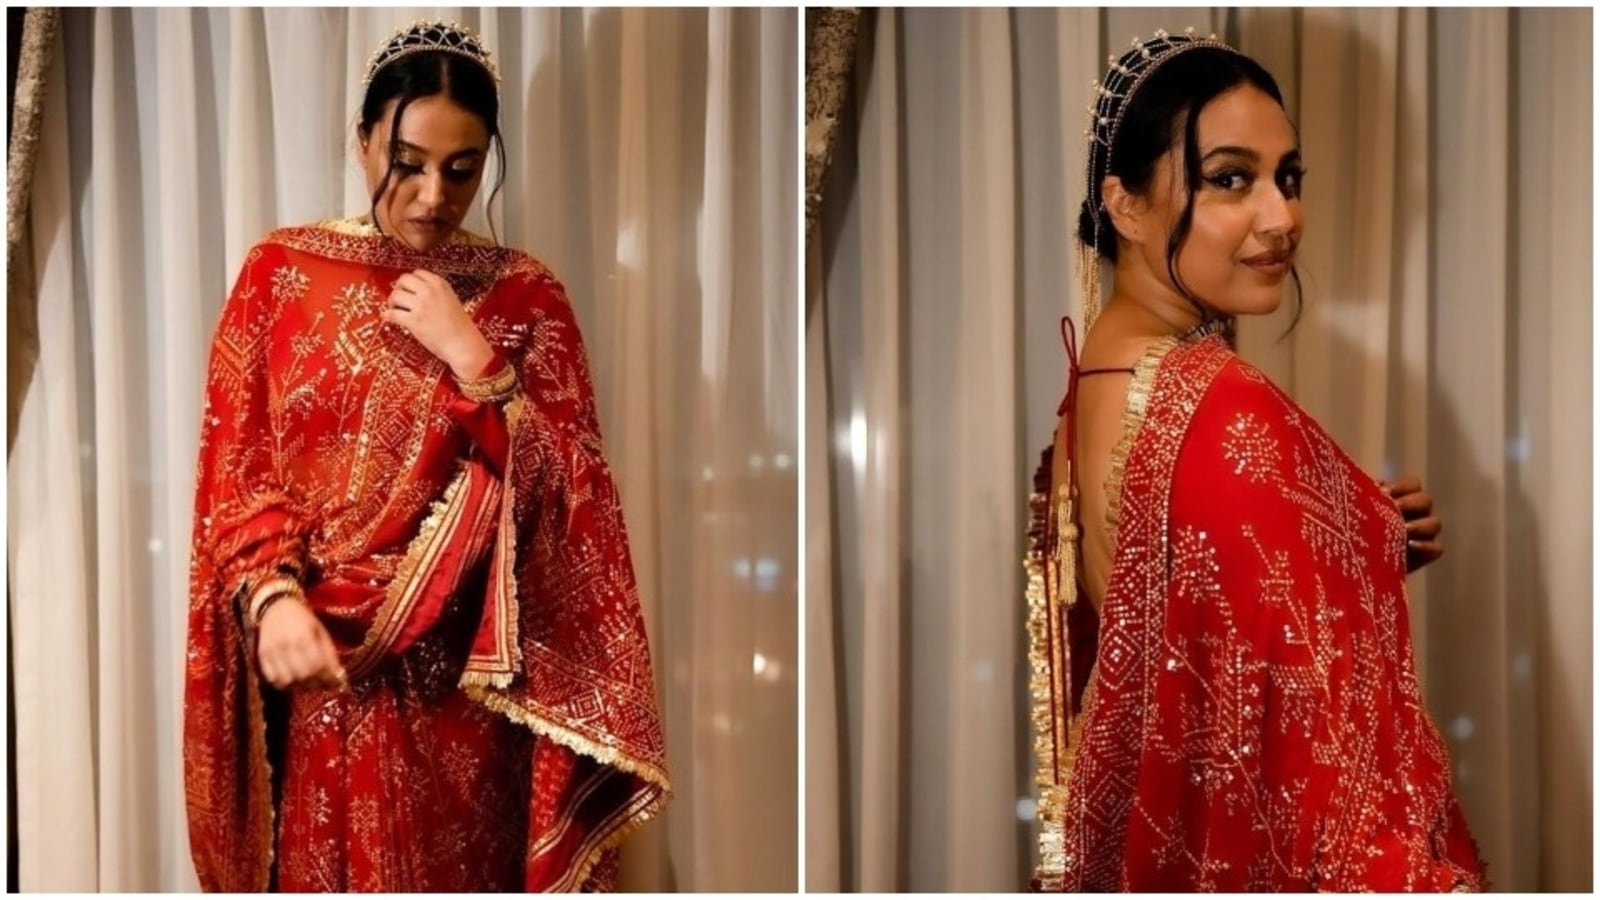 Swara Bhasker drapes red embroidered saree like a dupatta at Cairo Film Festival red carpet. Would you try this look?